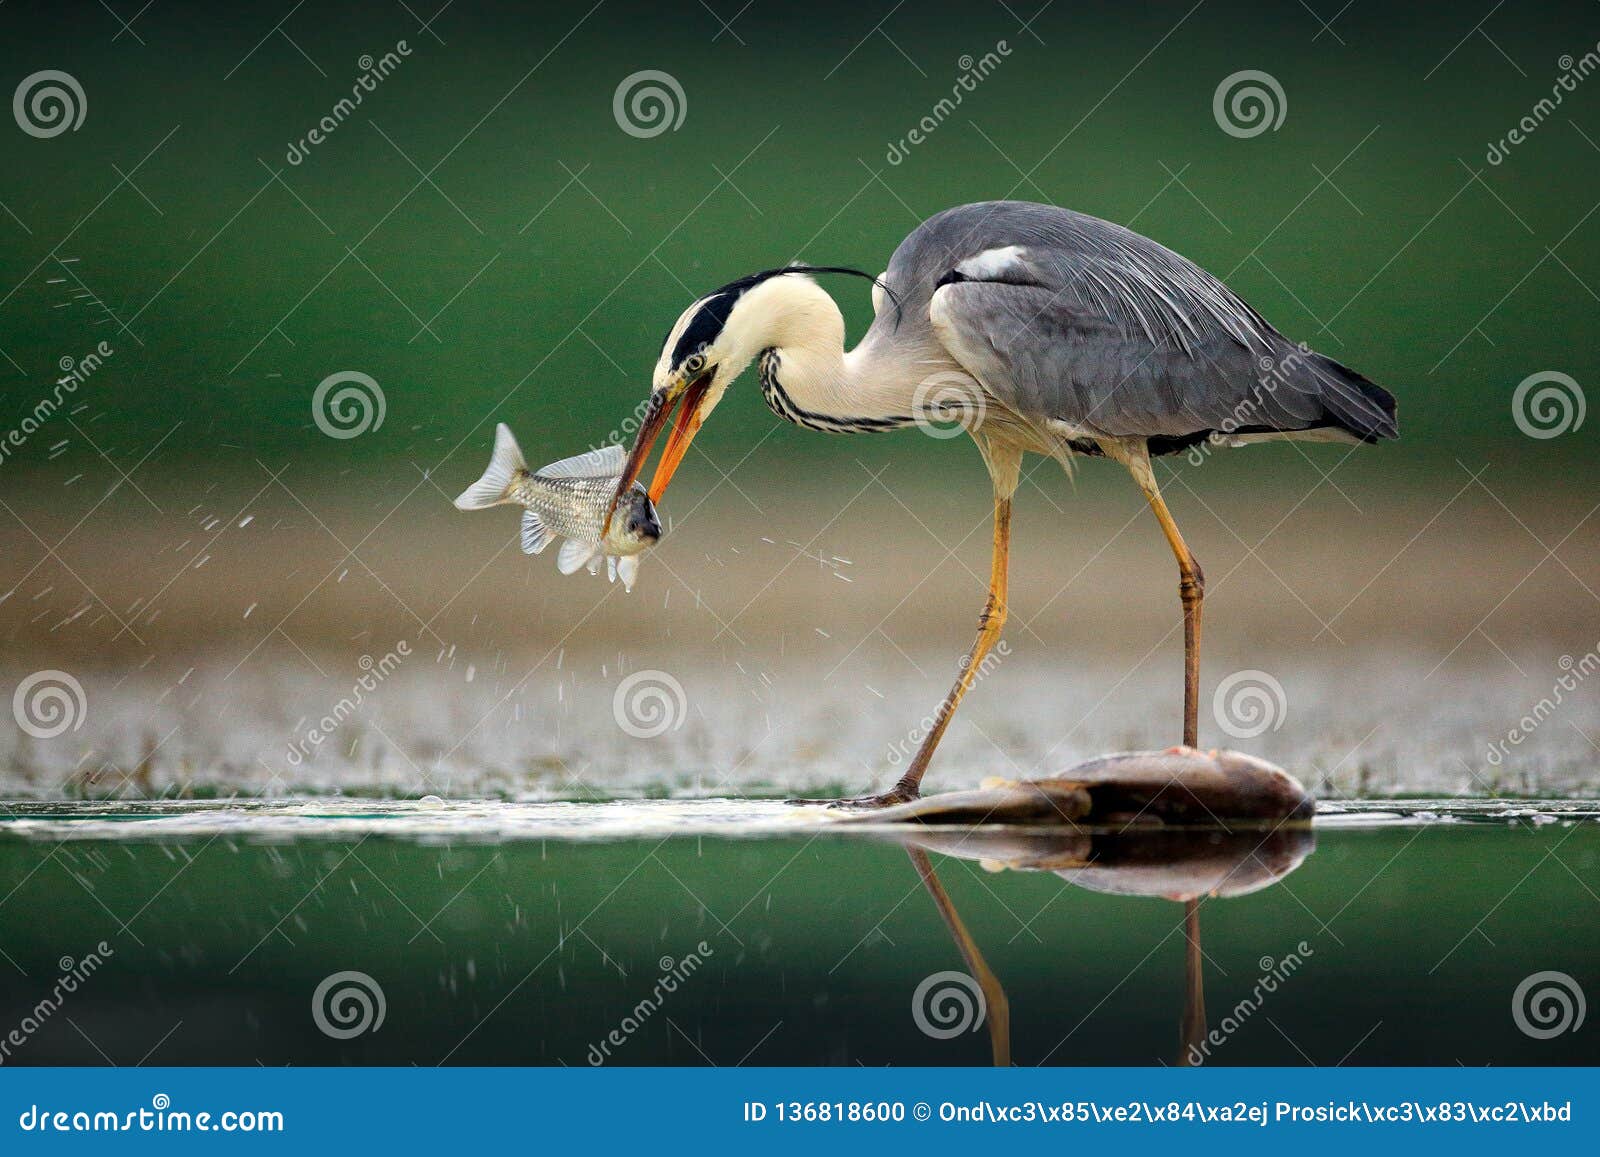 heron with fish. grey heron, ardea cinerea, blurred grass in background. heron in the forest lake. animal in the nature habitat,